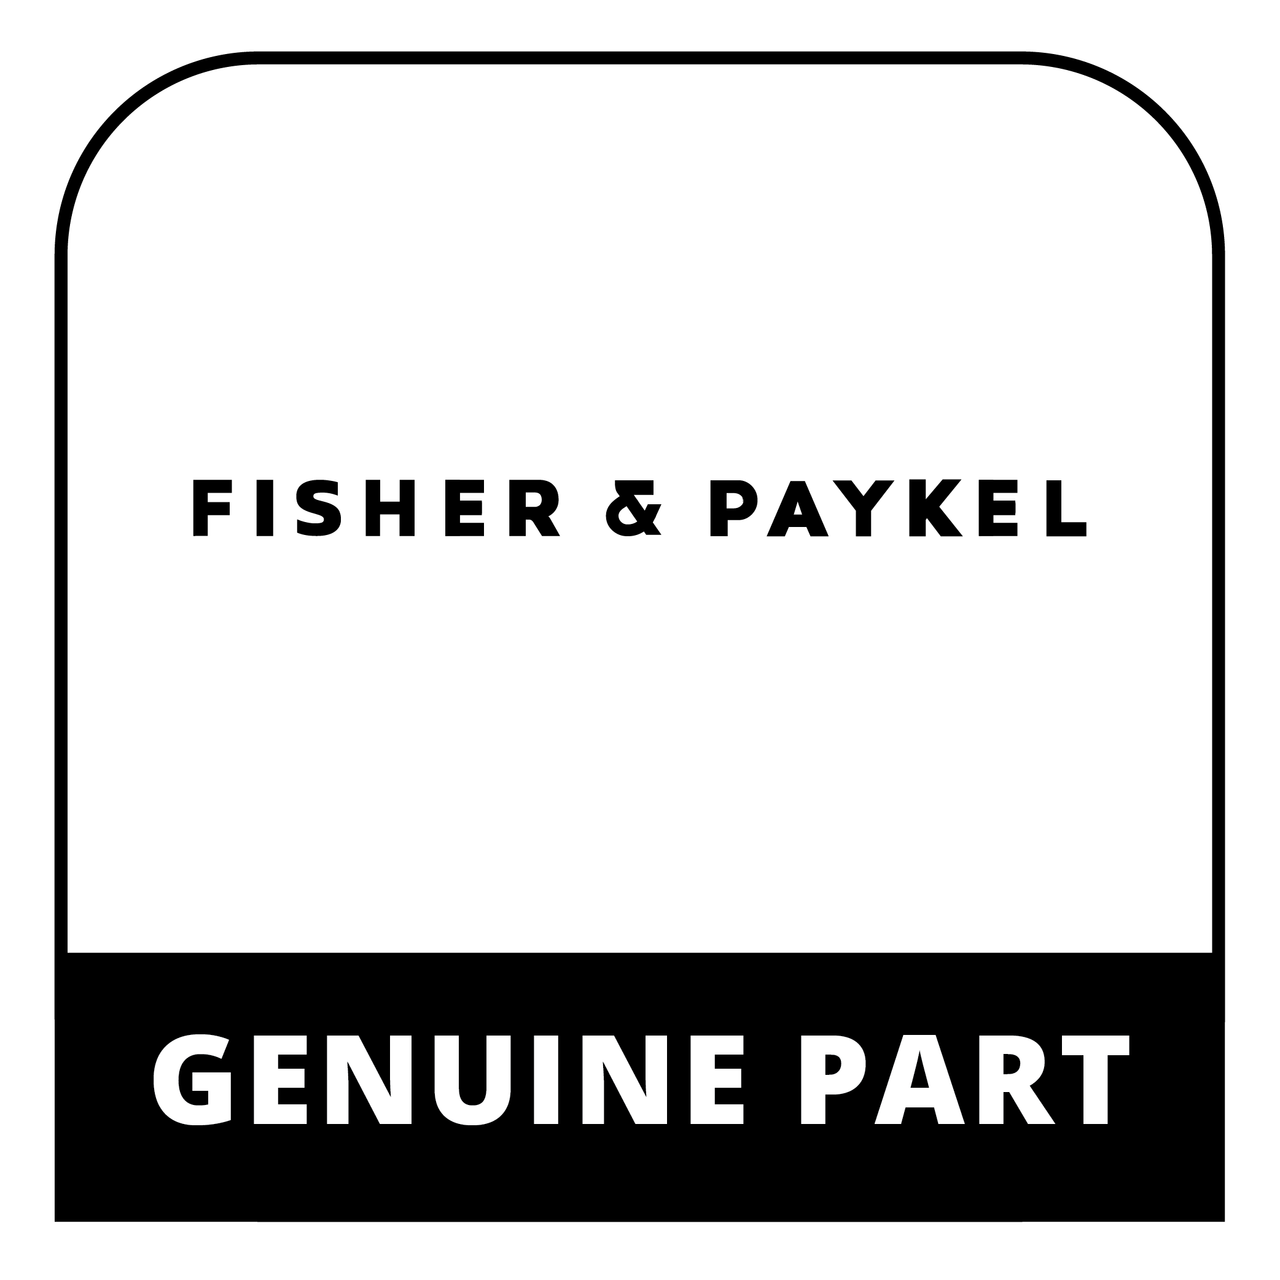 Fisher & Paykel 70141 - Dcs Apron (Material) - Genuine Fisher & Paykel (DCS) Part